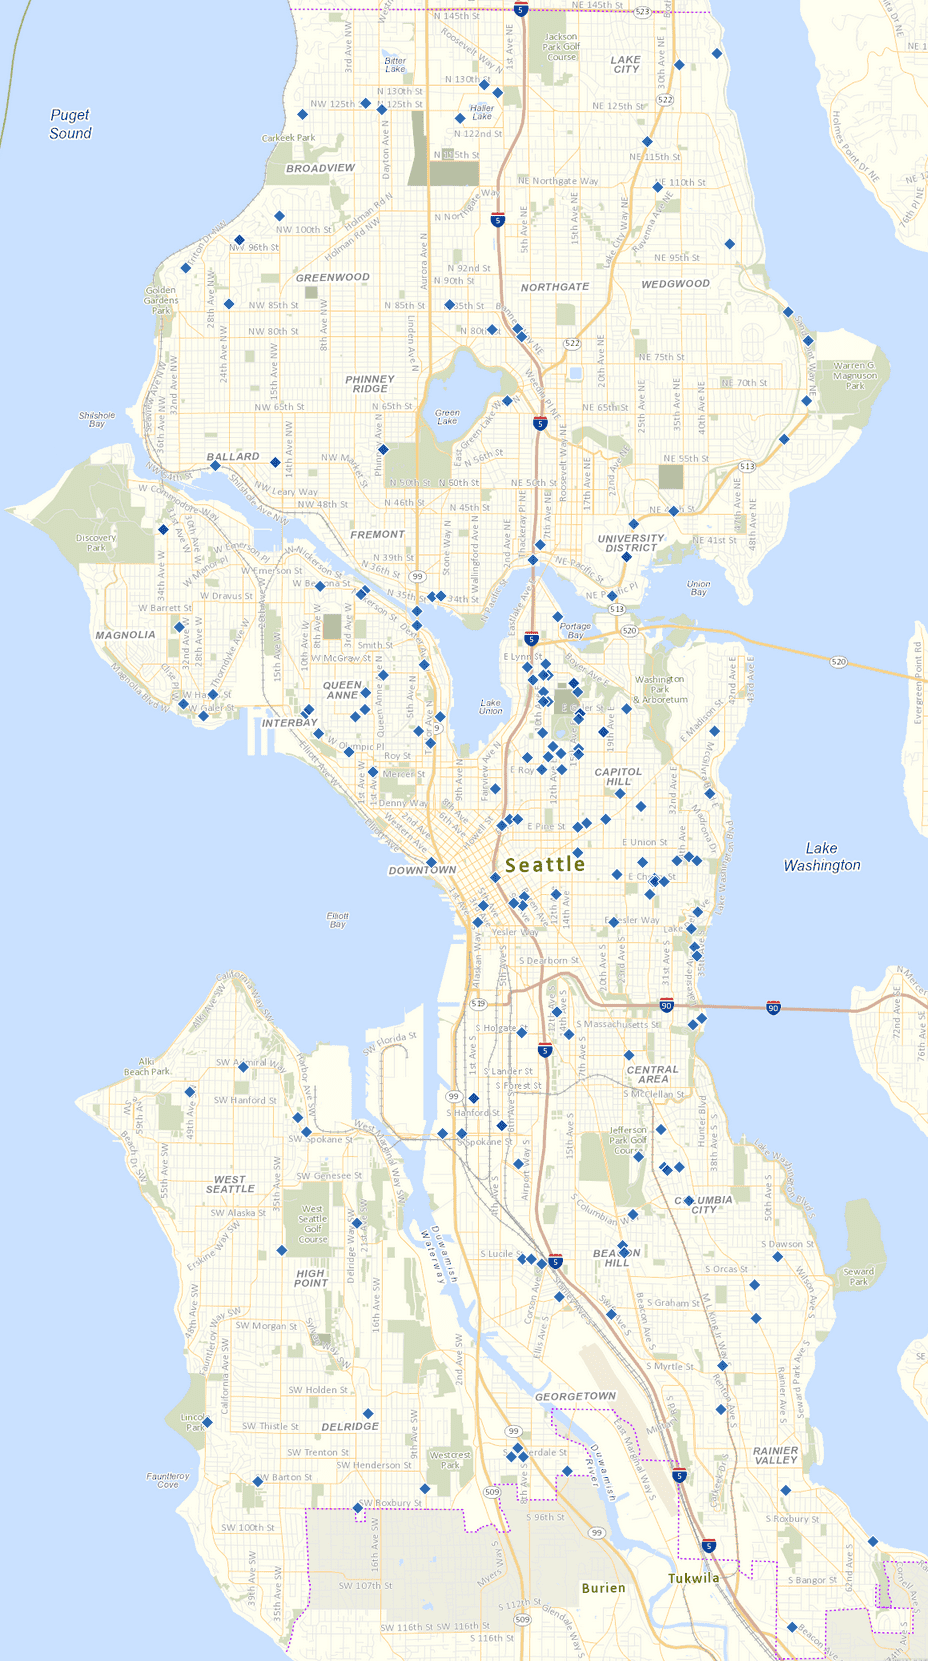 Map showing the location of pending pothole locations in the city of Seattle. Many blue dots line the map throughout the city, indicating pending pothole locations.